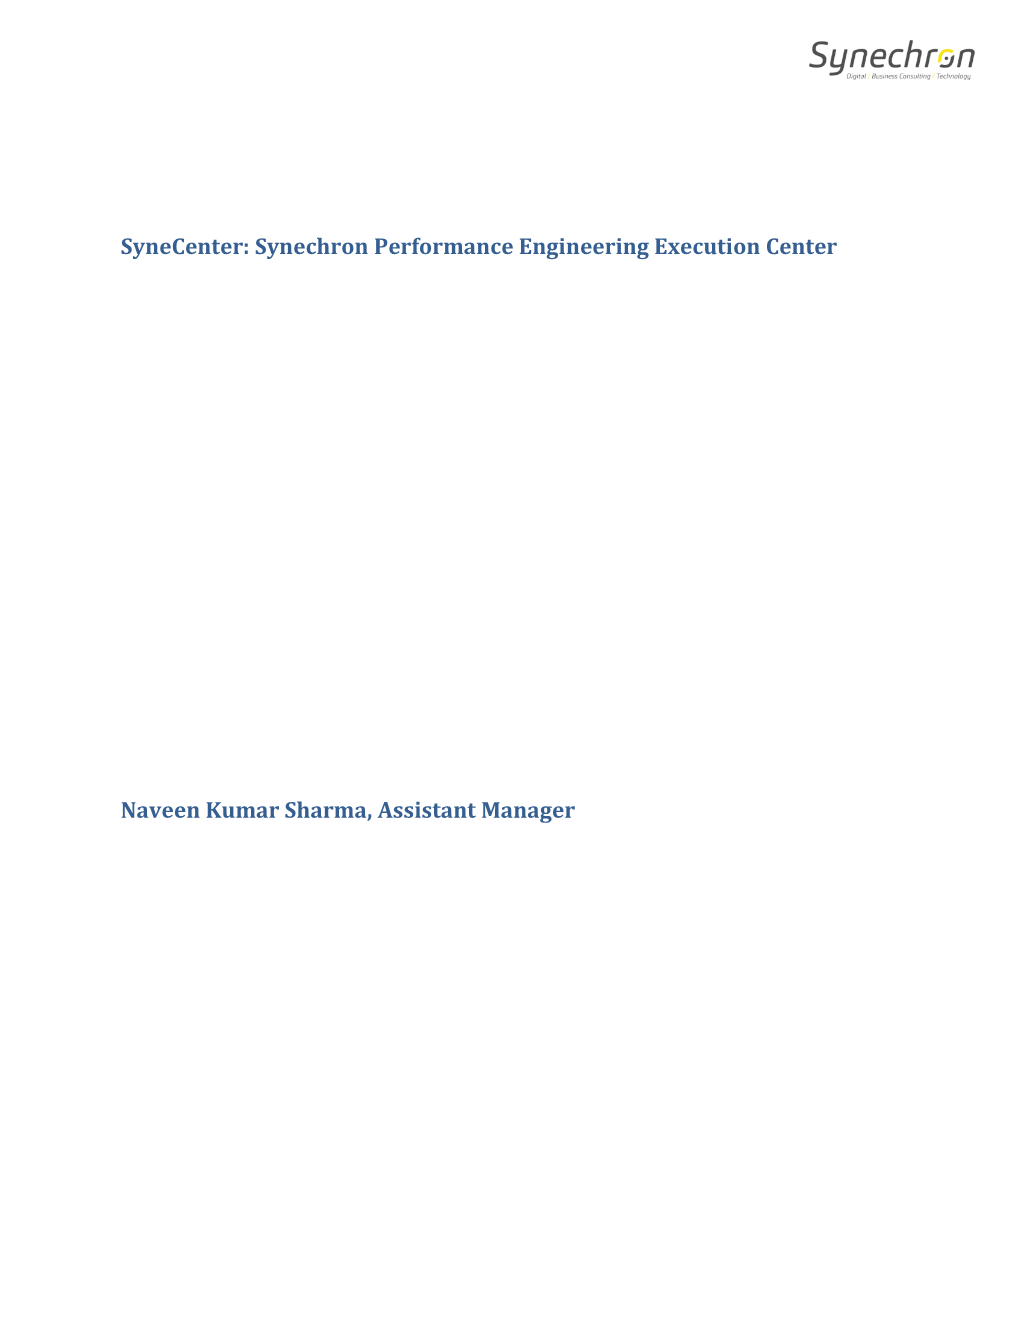 Synecenter: Synechron Performance Engineering Execution Center